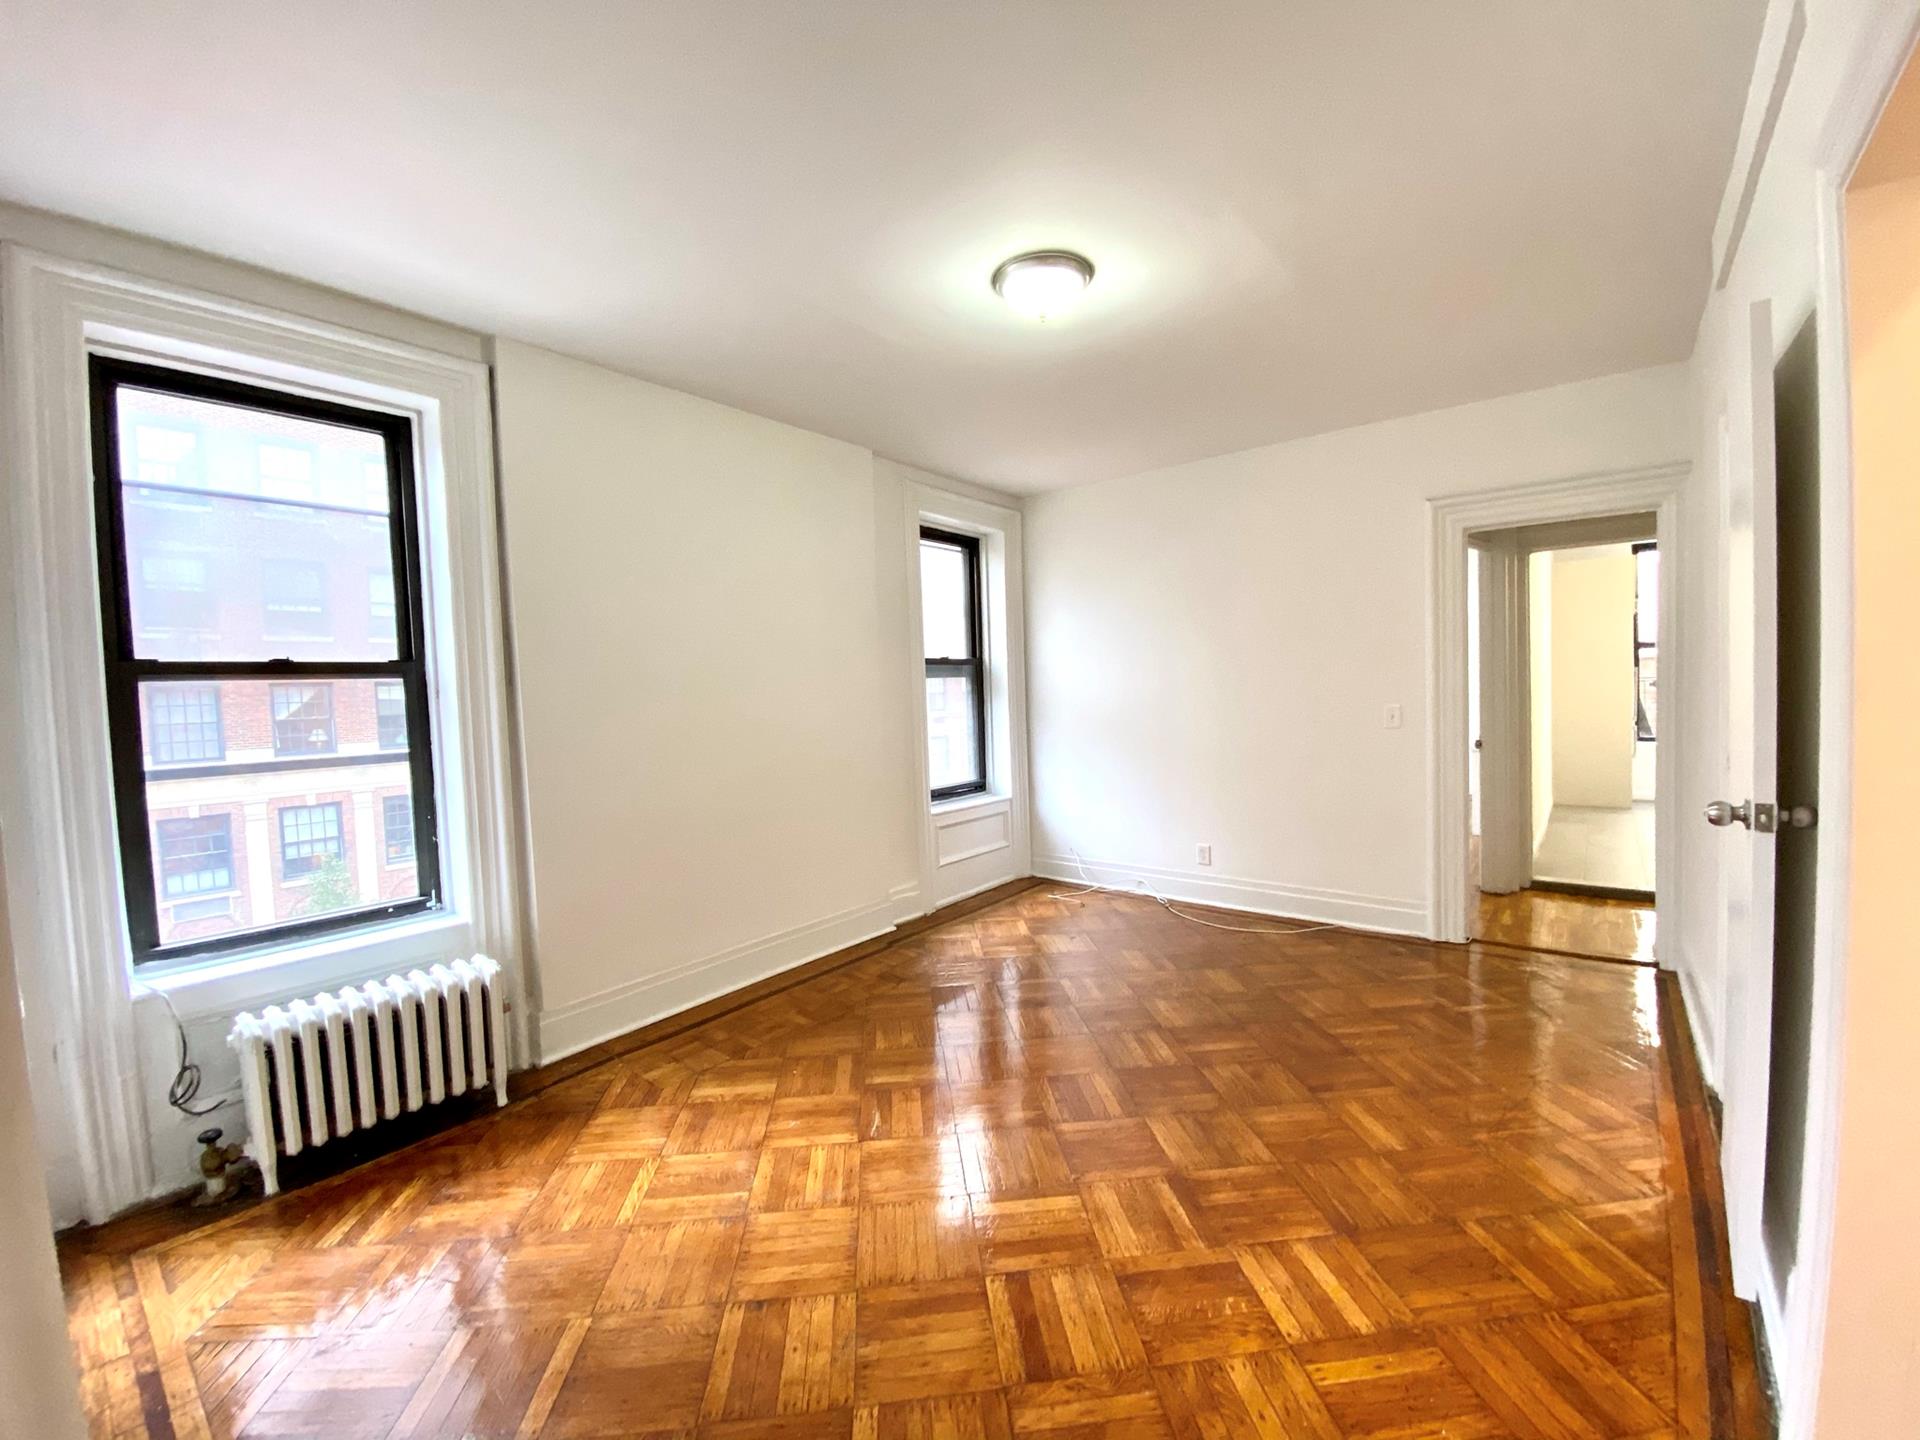 136 East 70th Street 3, Lenox Hill, Upper East Side, NYC - 4 Bedrooms  
1.5 Bathrooms  
6 Rooms - 